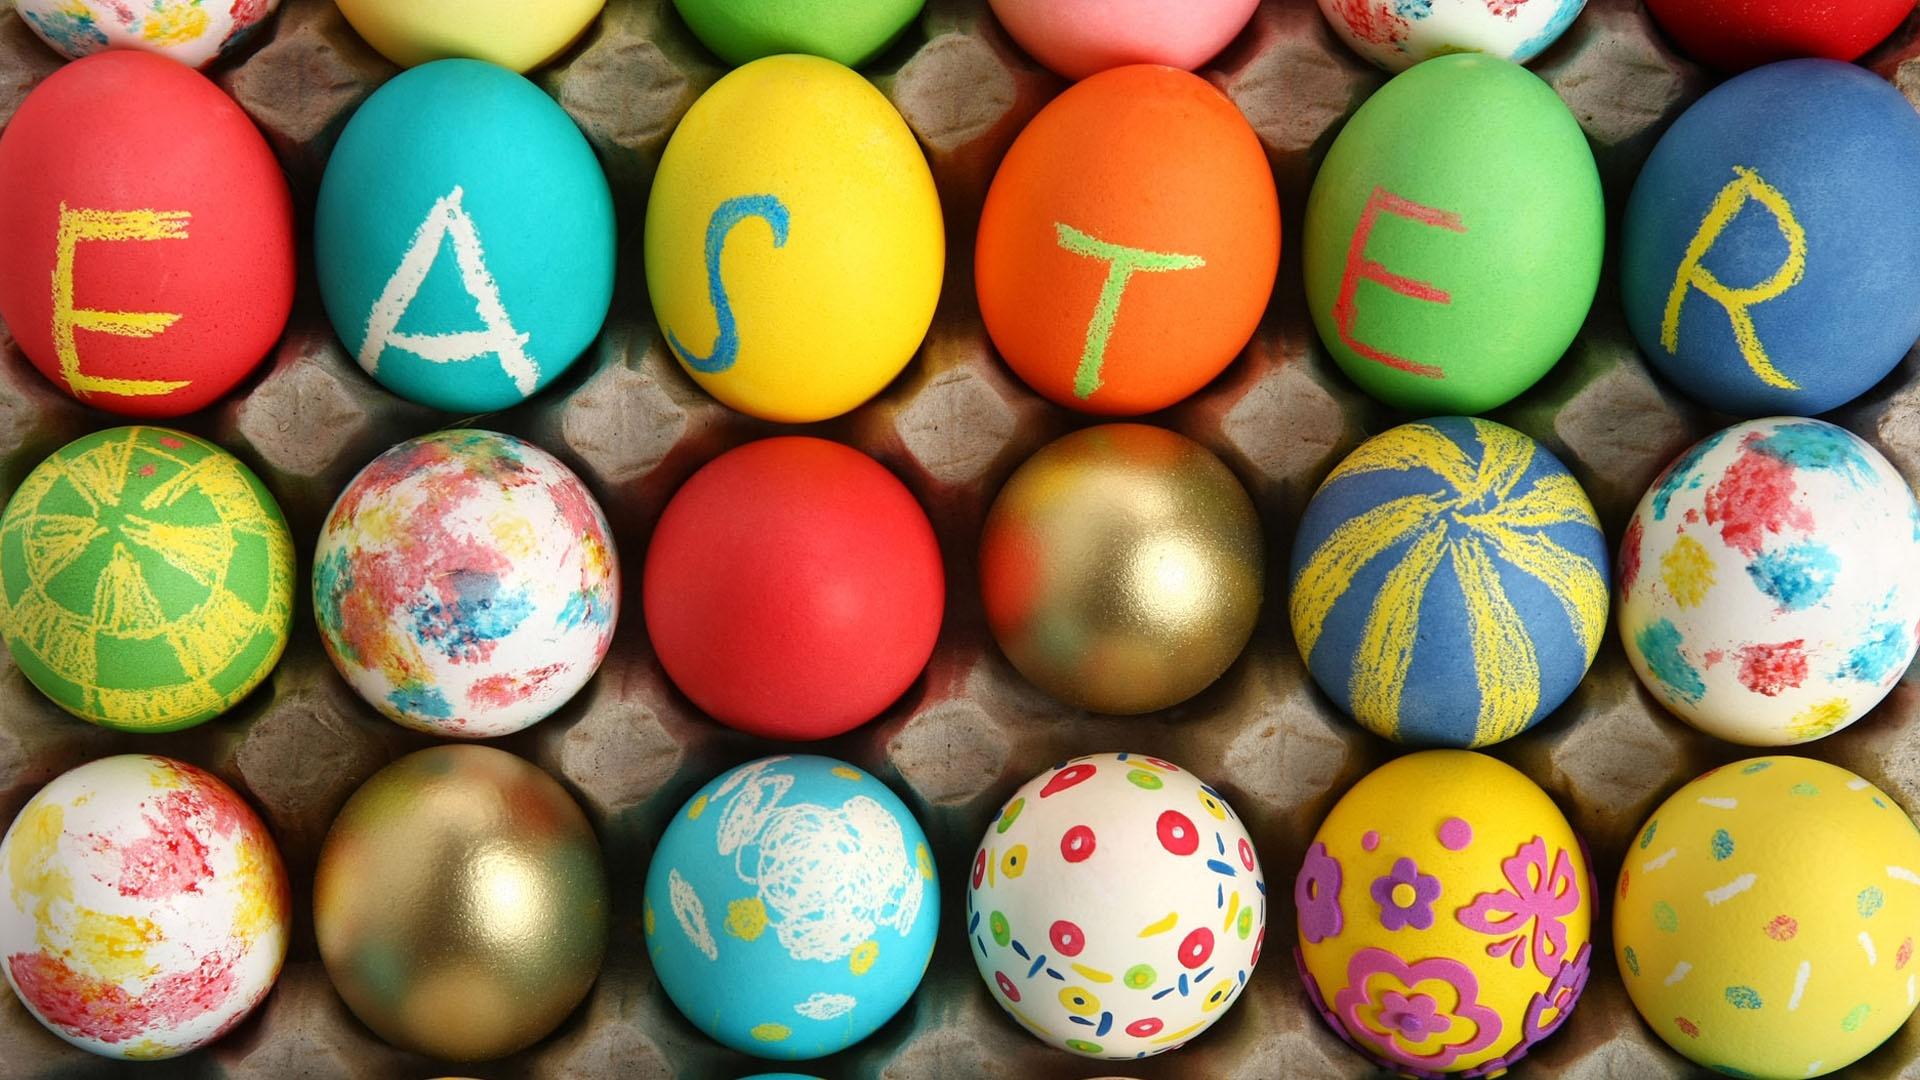 Happy Easter 2019 Image, Picture, Quotes, Wishes, Messages